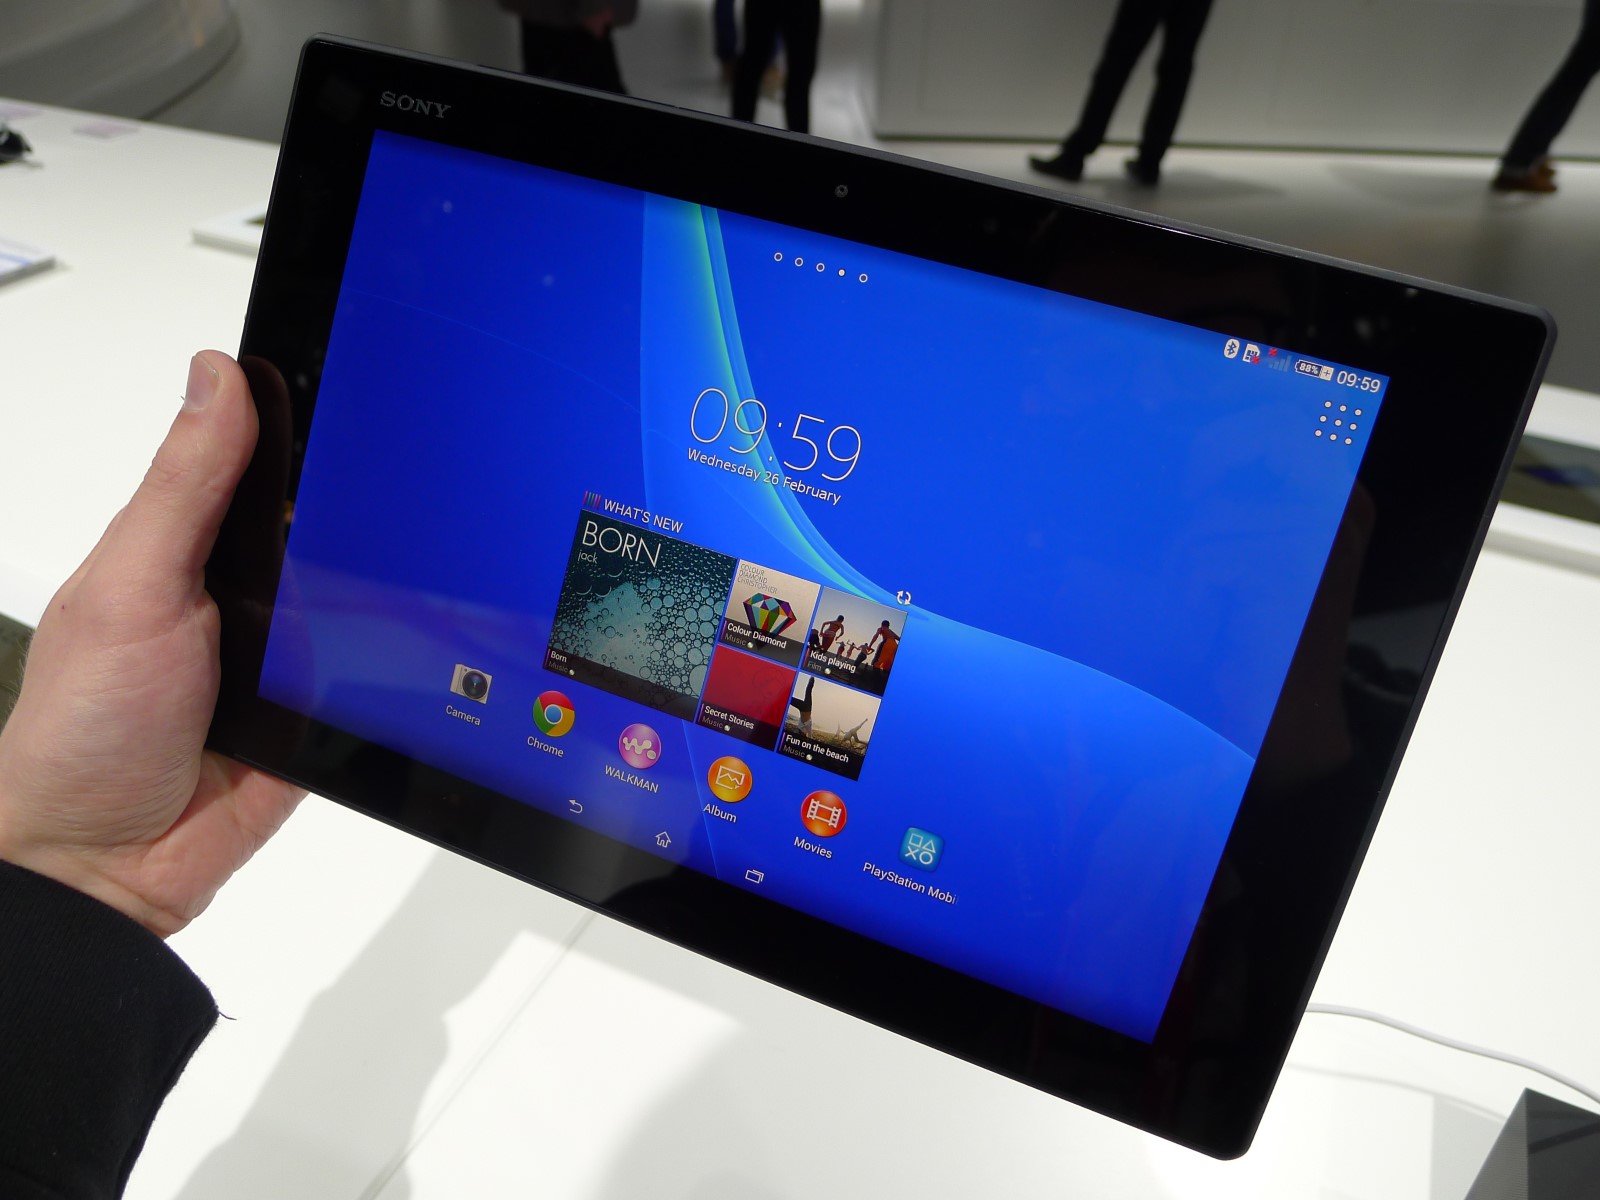 powering-up-charging-the-sony-xperia-z2-tablet